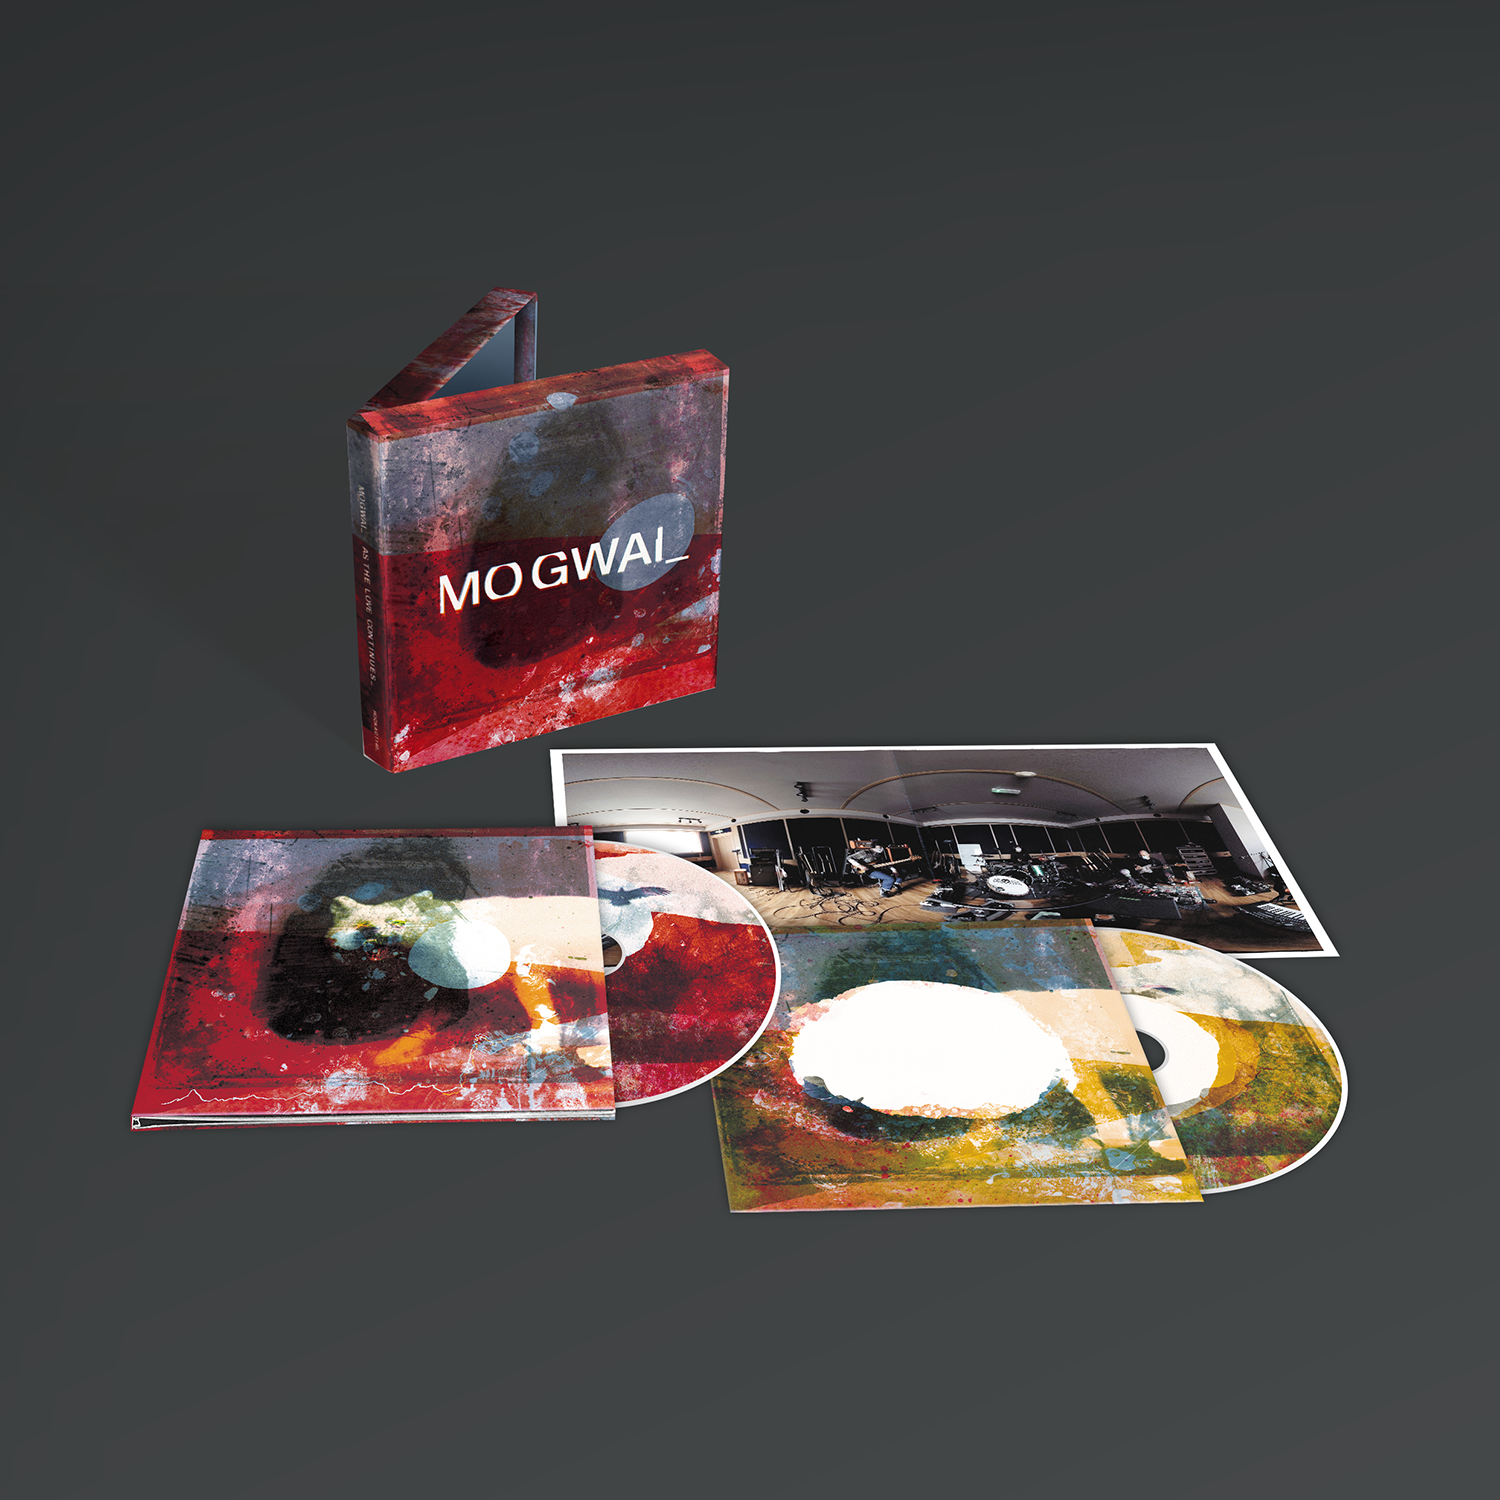 Mogwai - As The Love Continues: Limited Edition CD Box Set